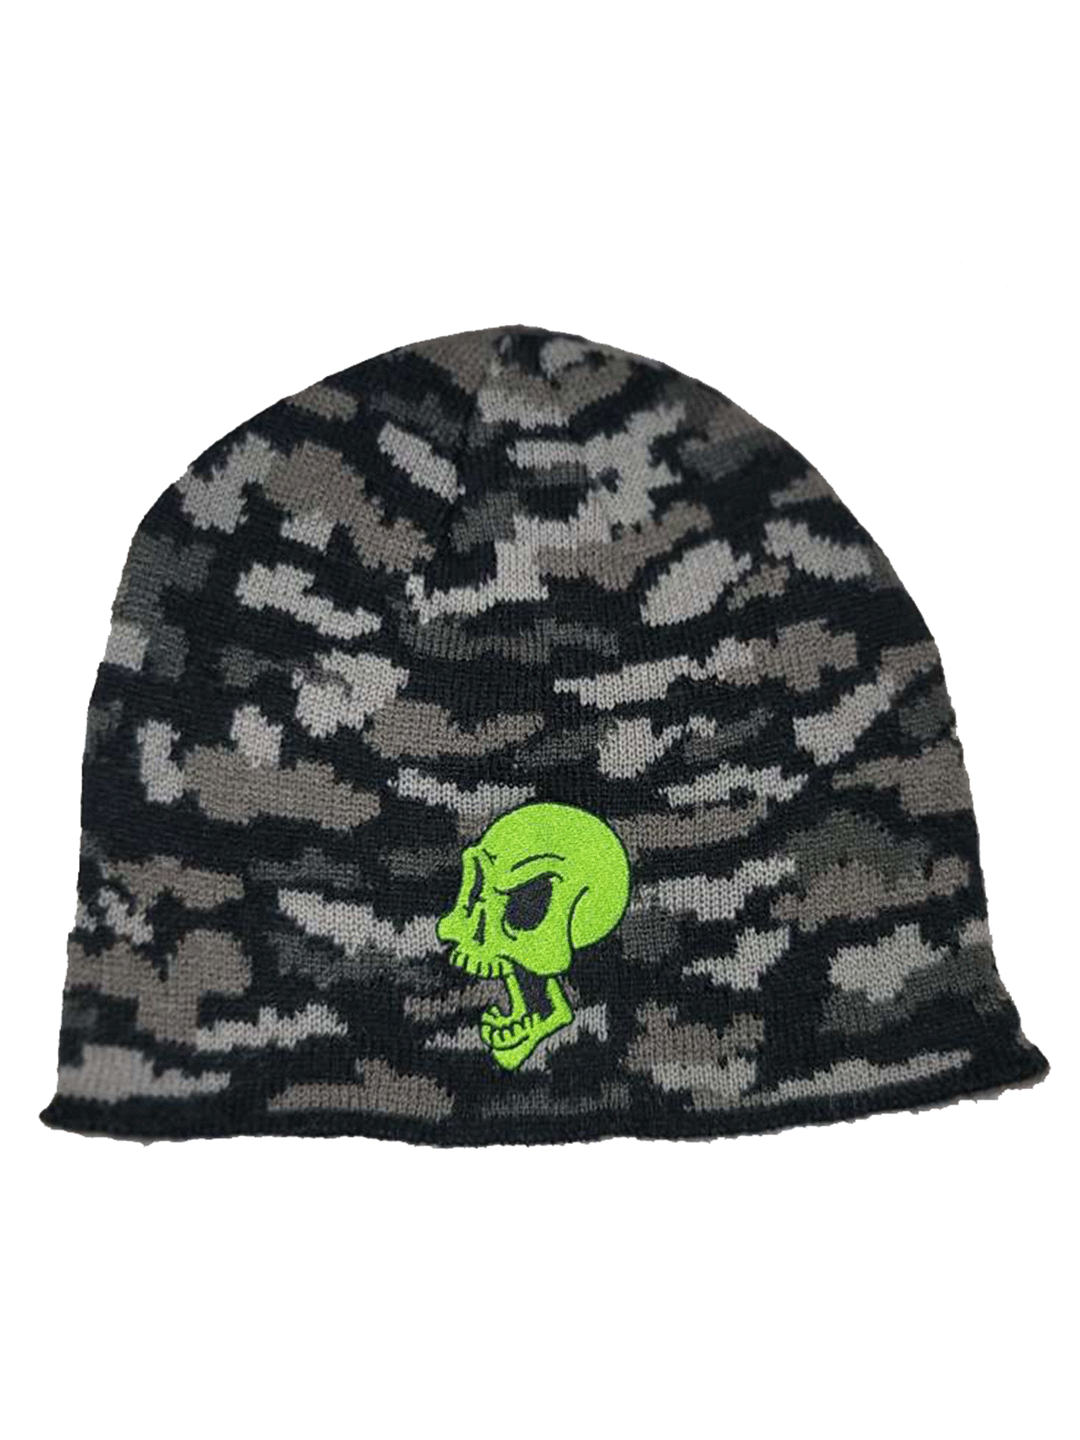 Epic Camo Embroidery Skull Beanie [Free stickers!]